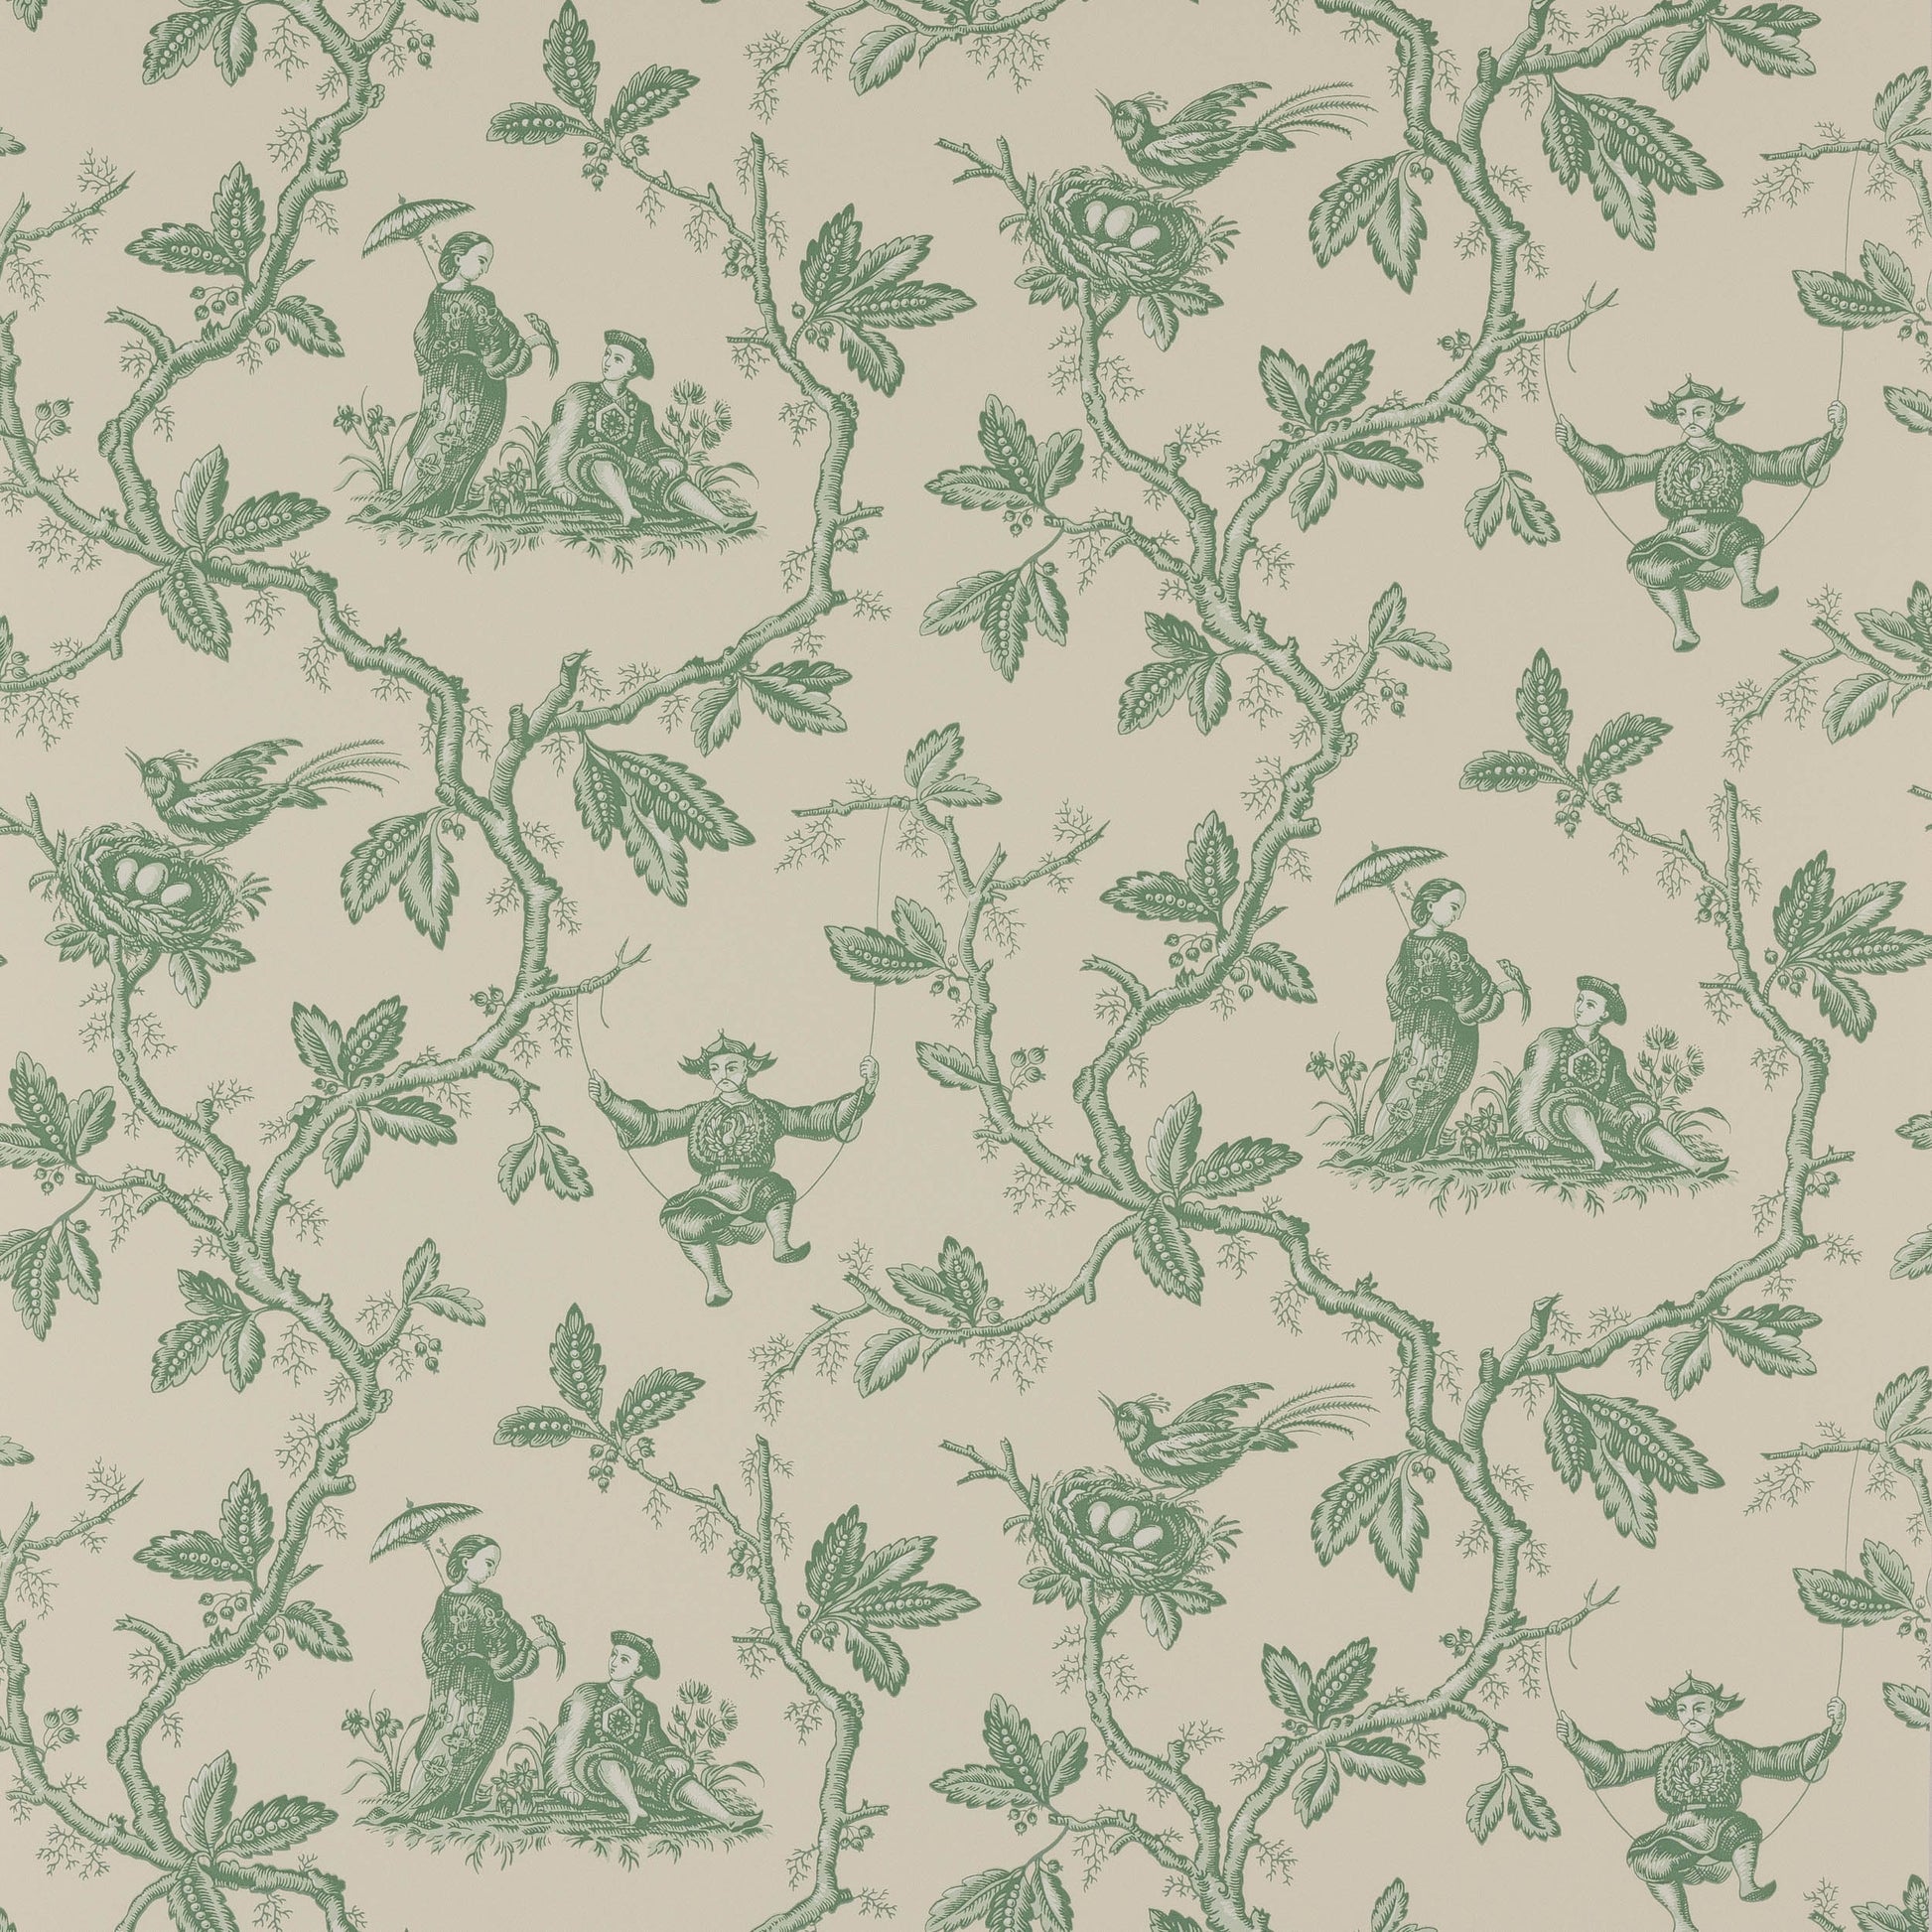 Toile Chinoise Wallpaper - Green